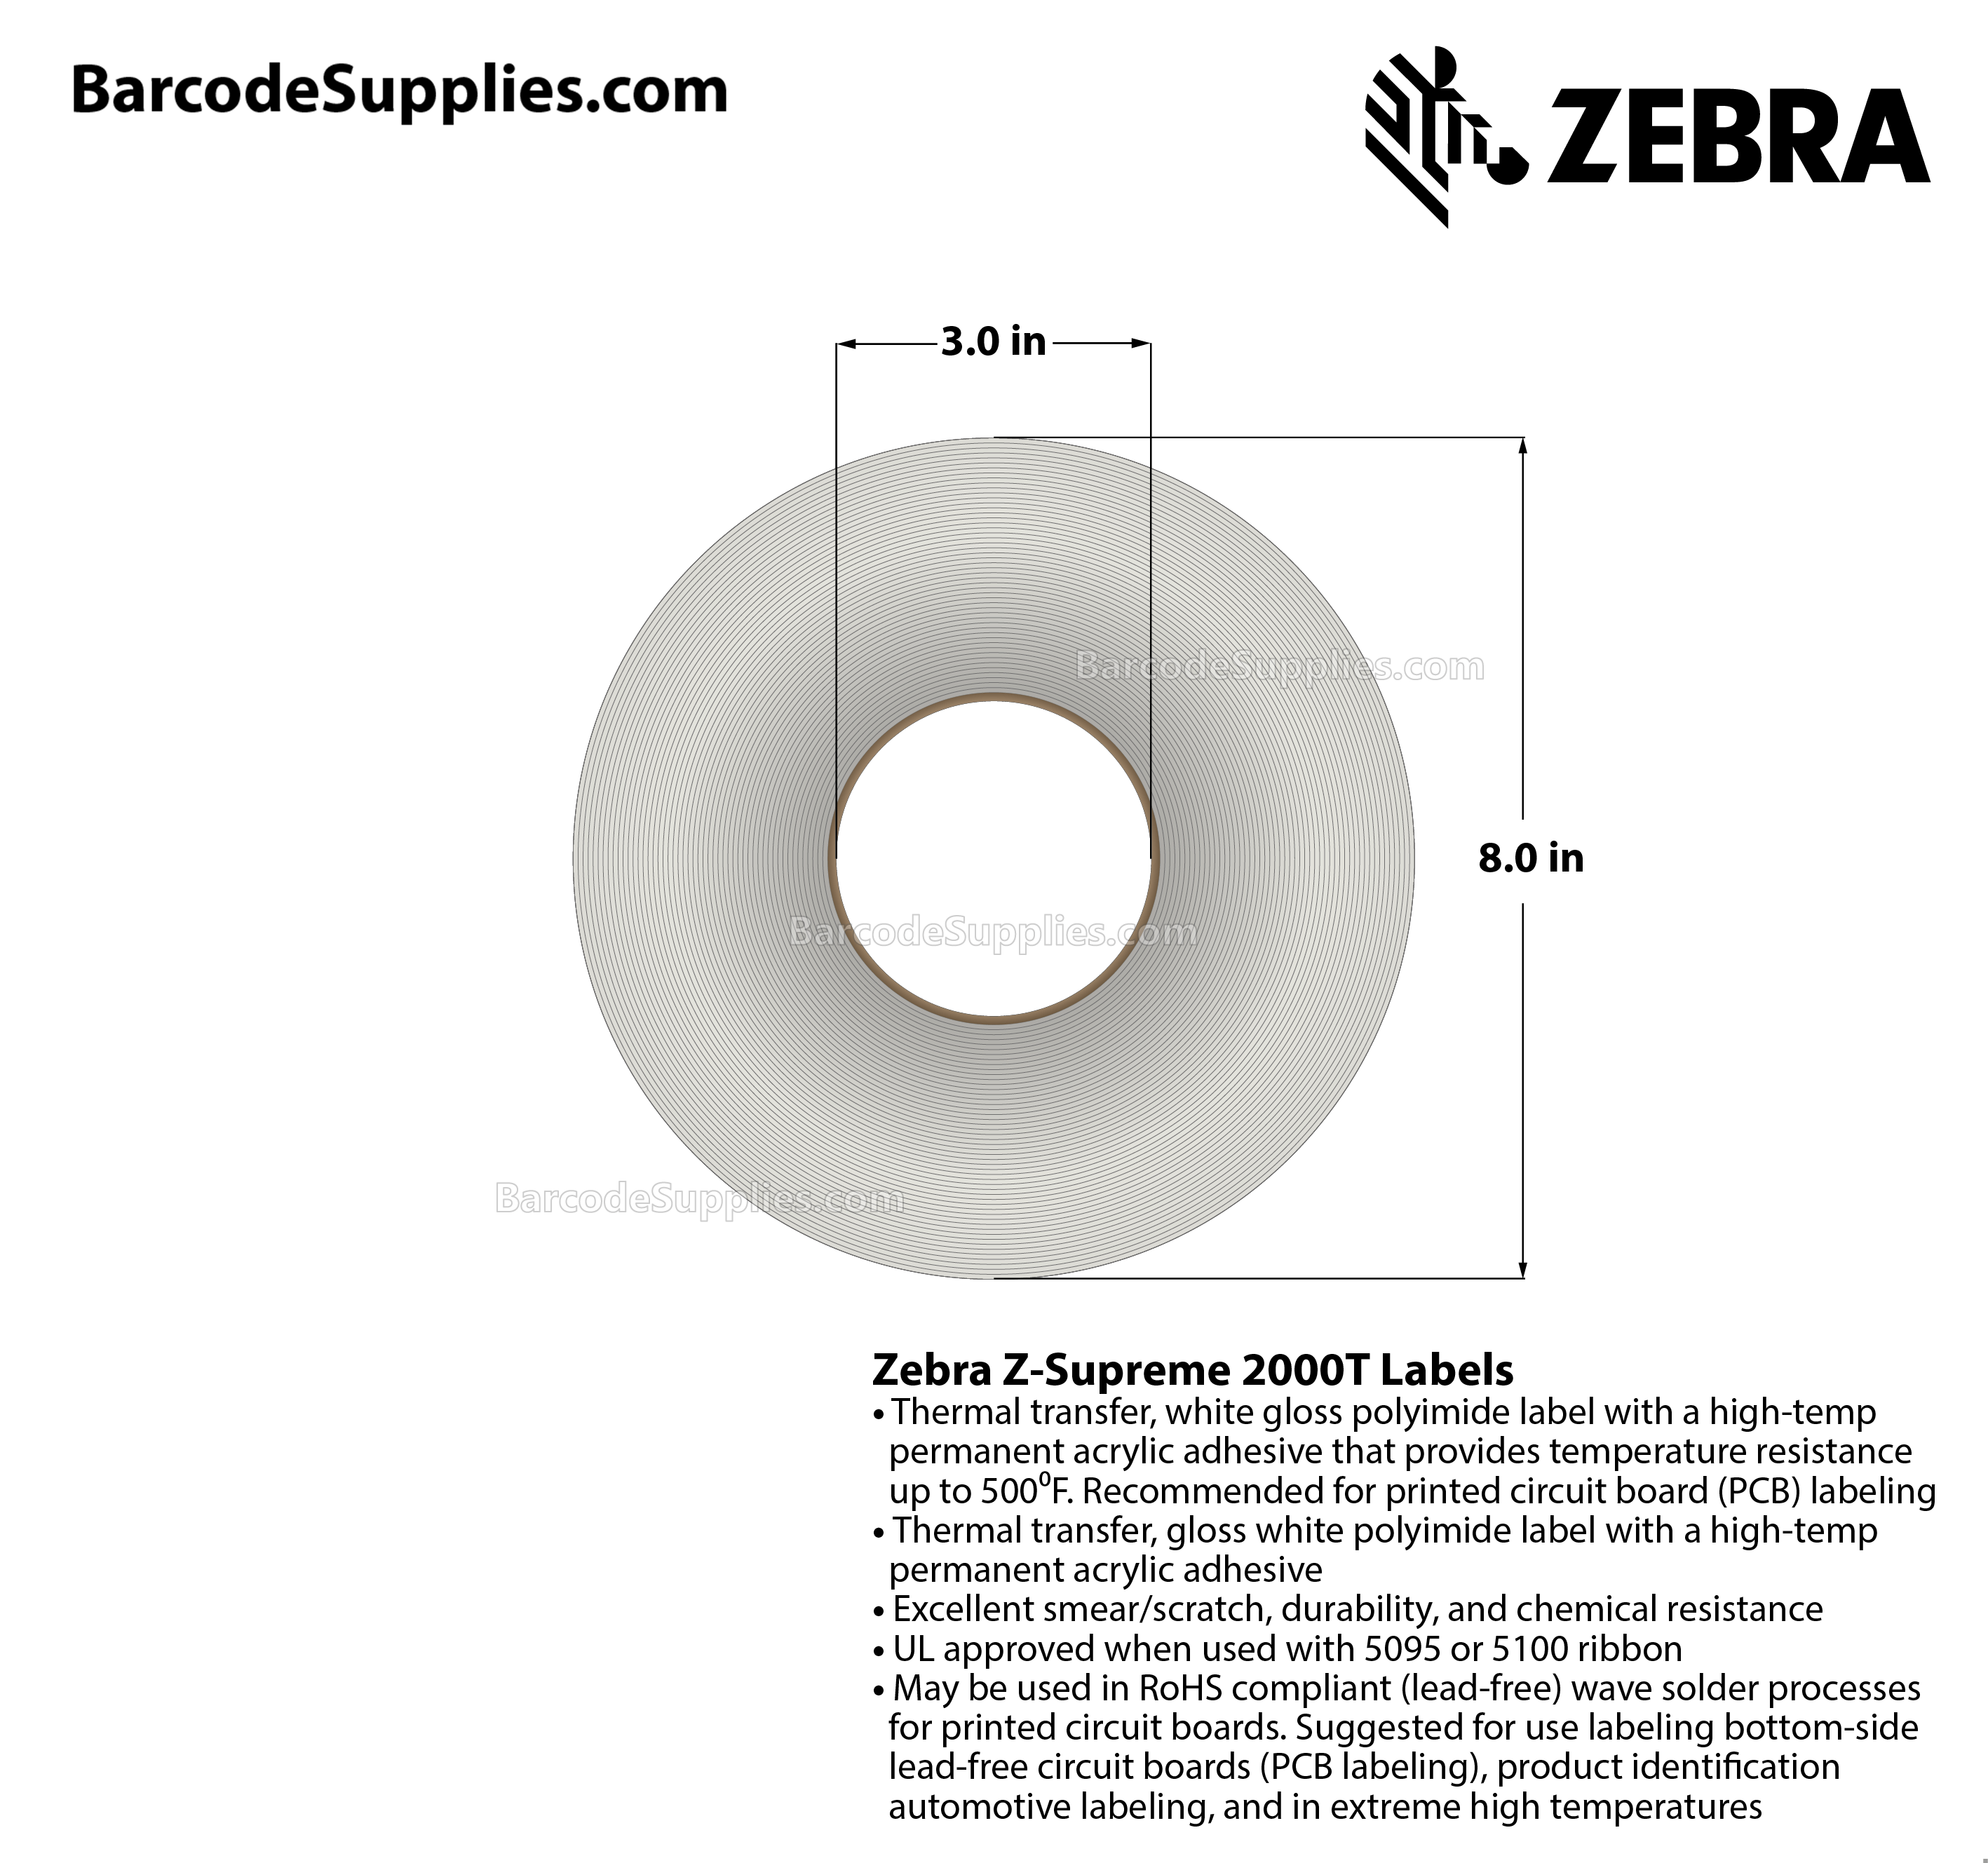 1 x 0.25 Thermal Transfer White Z-Supreme 2000T White Labels With High-temp Adhesive - Perforated - 10000 Labels Per Roll - Carton Of 1 Rolls - 10000 Labels Total - MPN: 10015765